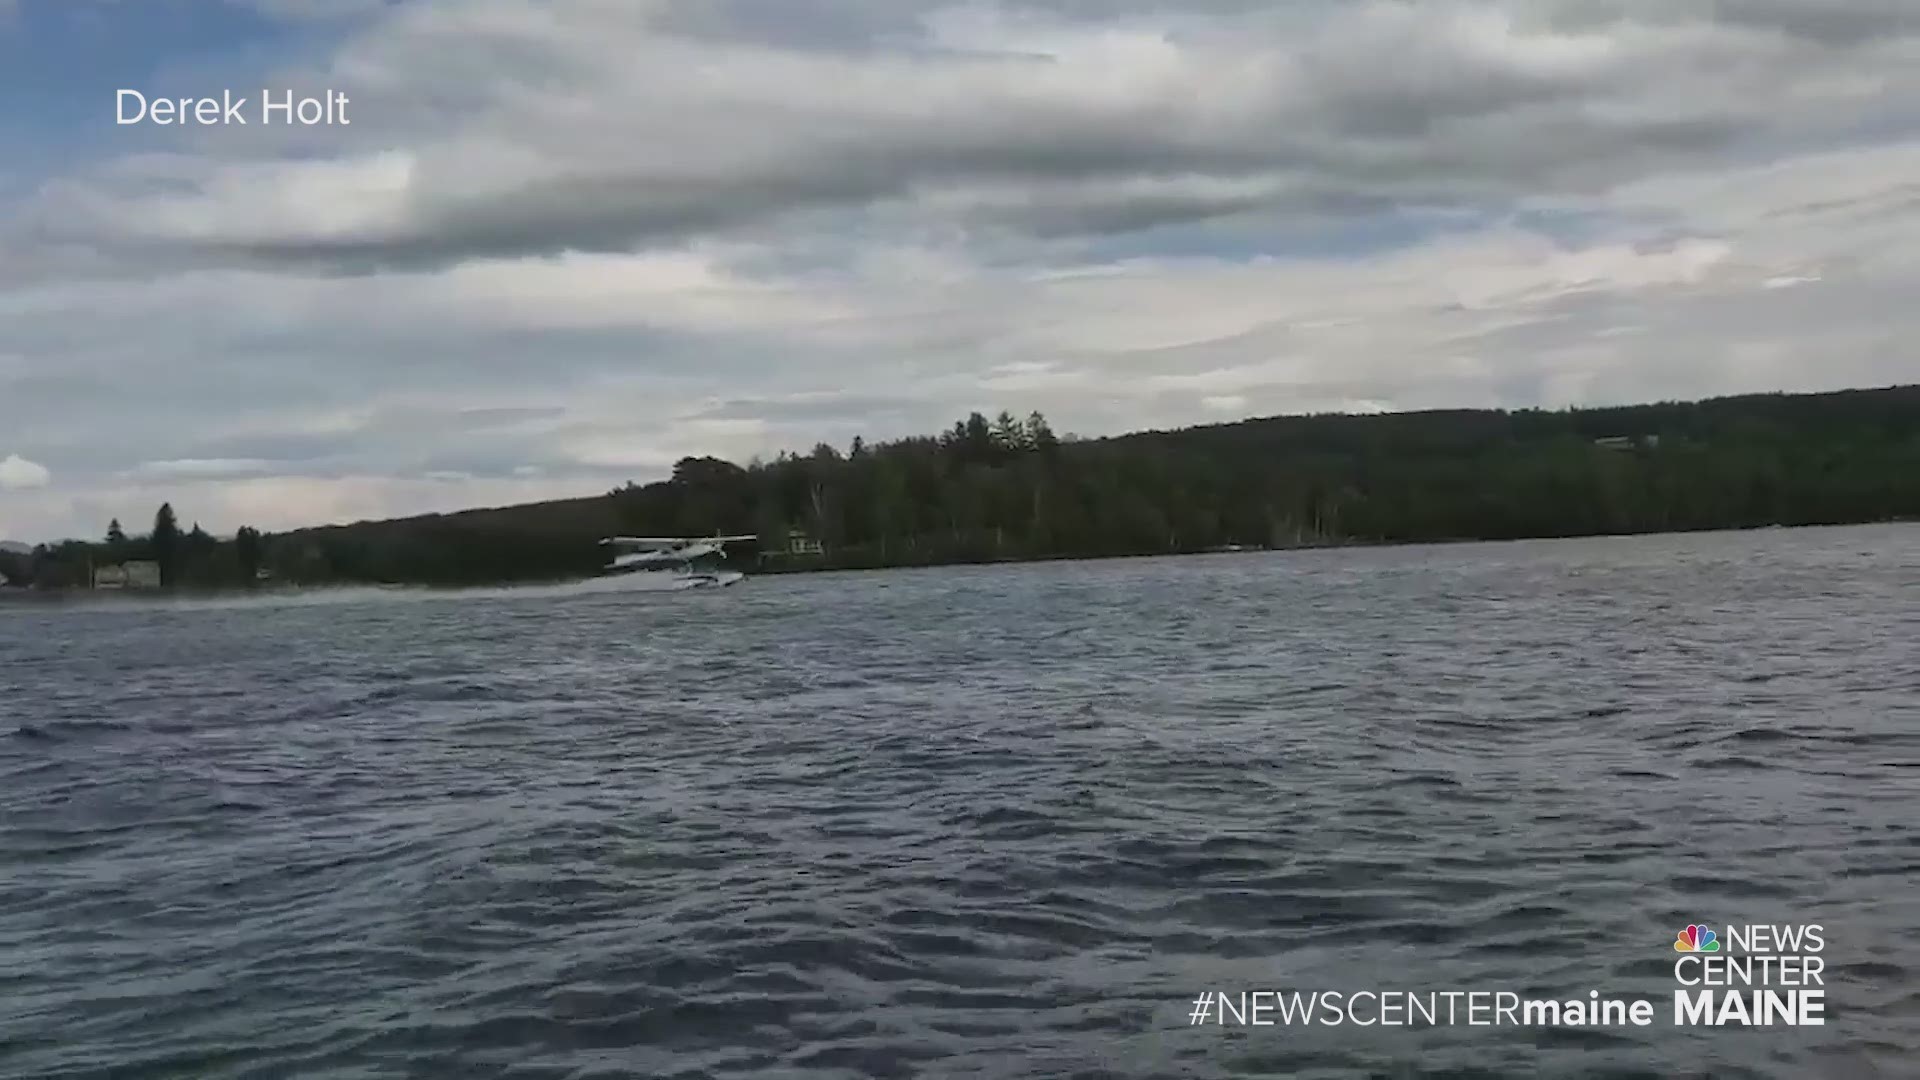 WATCH: A small plane with two people on board crashed into Rangeley Lake near Russell Cove on Thursday, August 22.